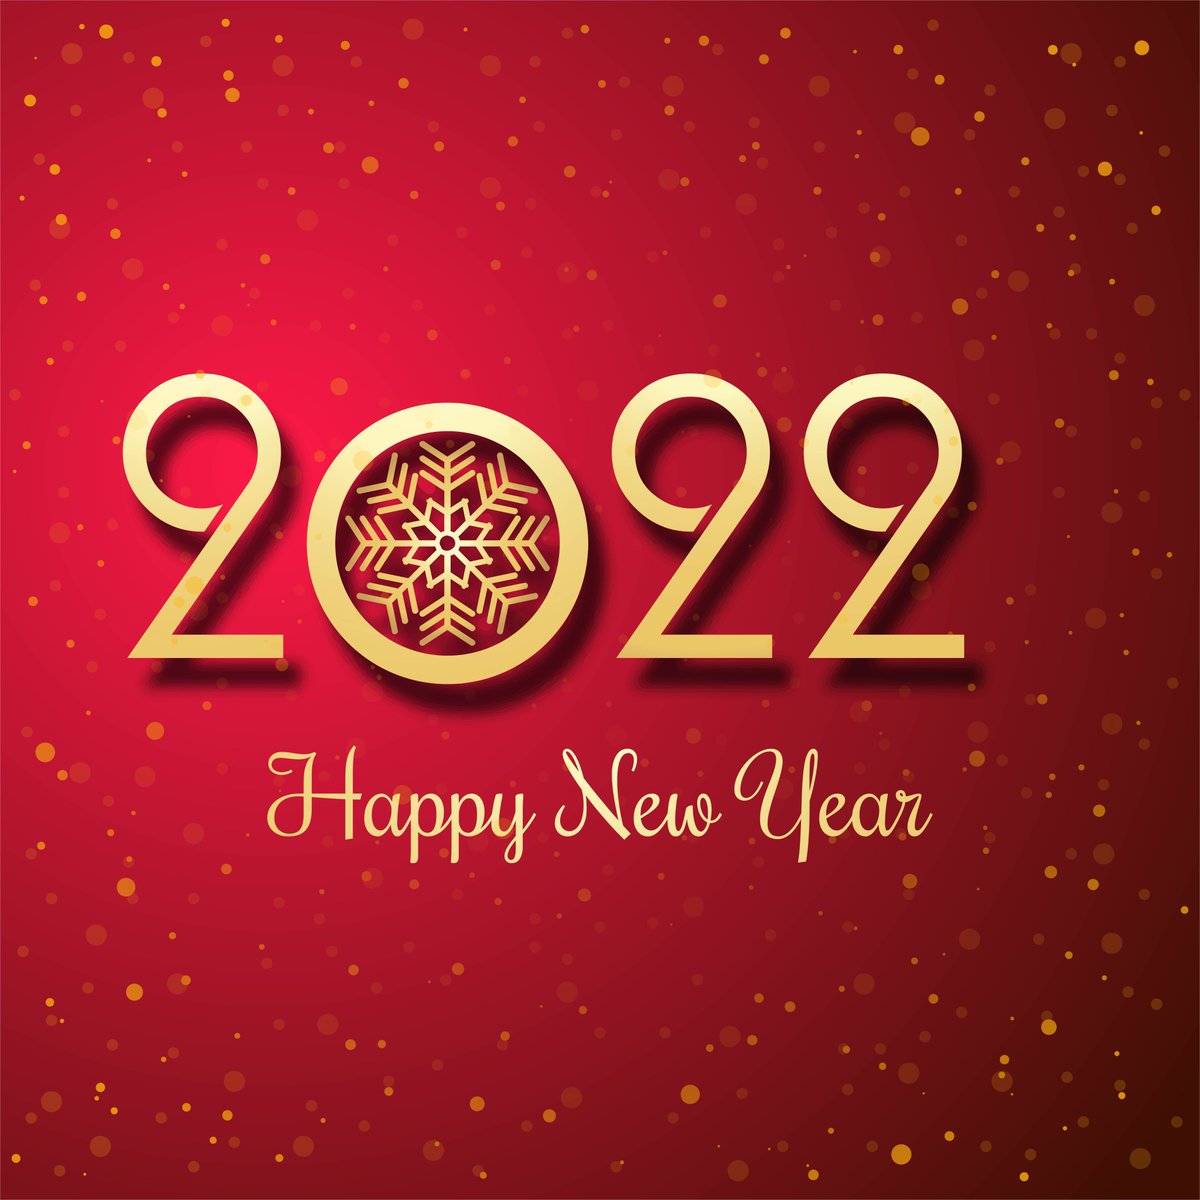 Wishing every day of the new year to be filled with success, happiness, and prosperity for you. Happy New Year.✨

#newyear2022 #newyearcelebrations